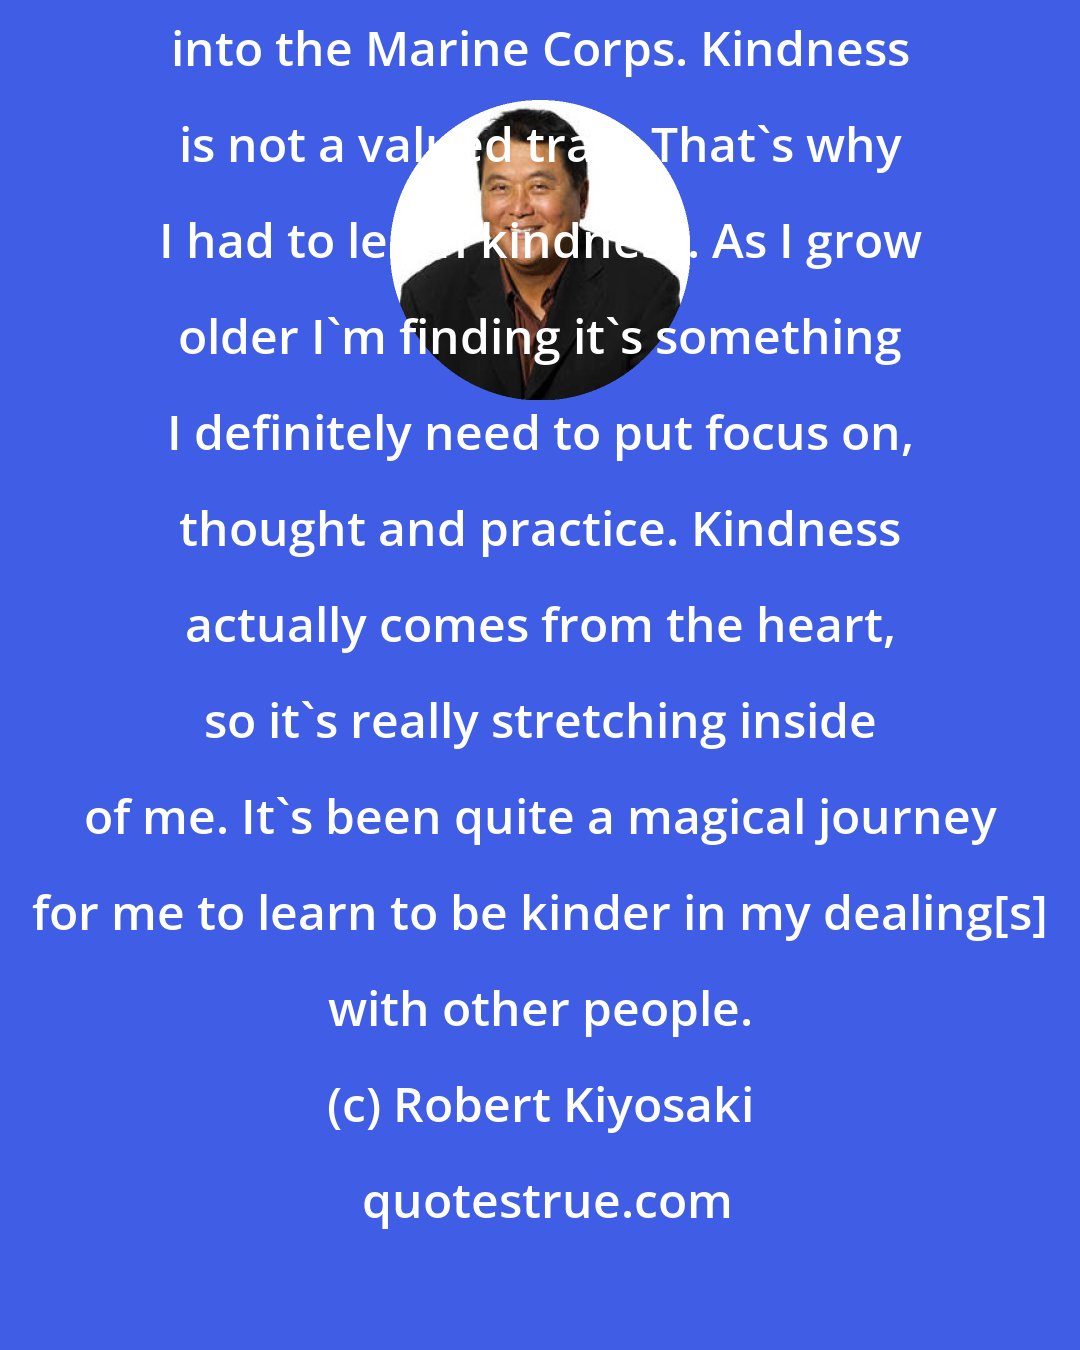 Robert Kiyosaki: I grew up playing football and hunting; and went to military school and then into the Marine Corps. Kindness is not a valued trait. That`s why I had to learn kindness. As I grow older I'm finding it's something I definitely need to put focus on, thought and practice. Kindness actually comes from the heart, so it's really stretching inside of me. It's been quite a magical journey for me to learn to be kinder in my dealing[s] with other people.